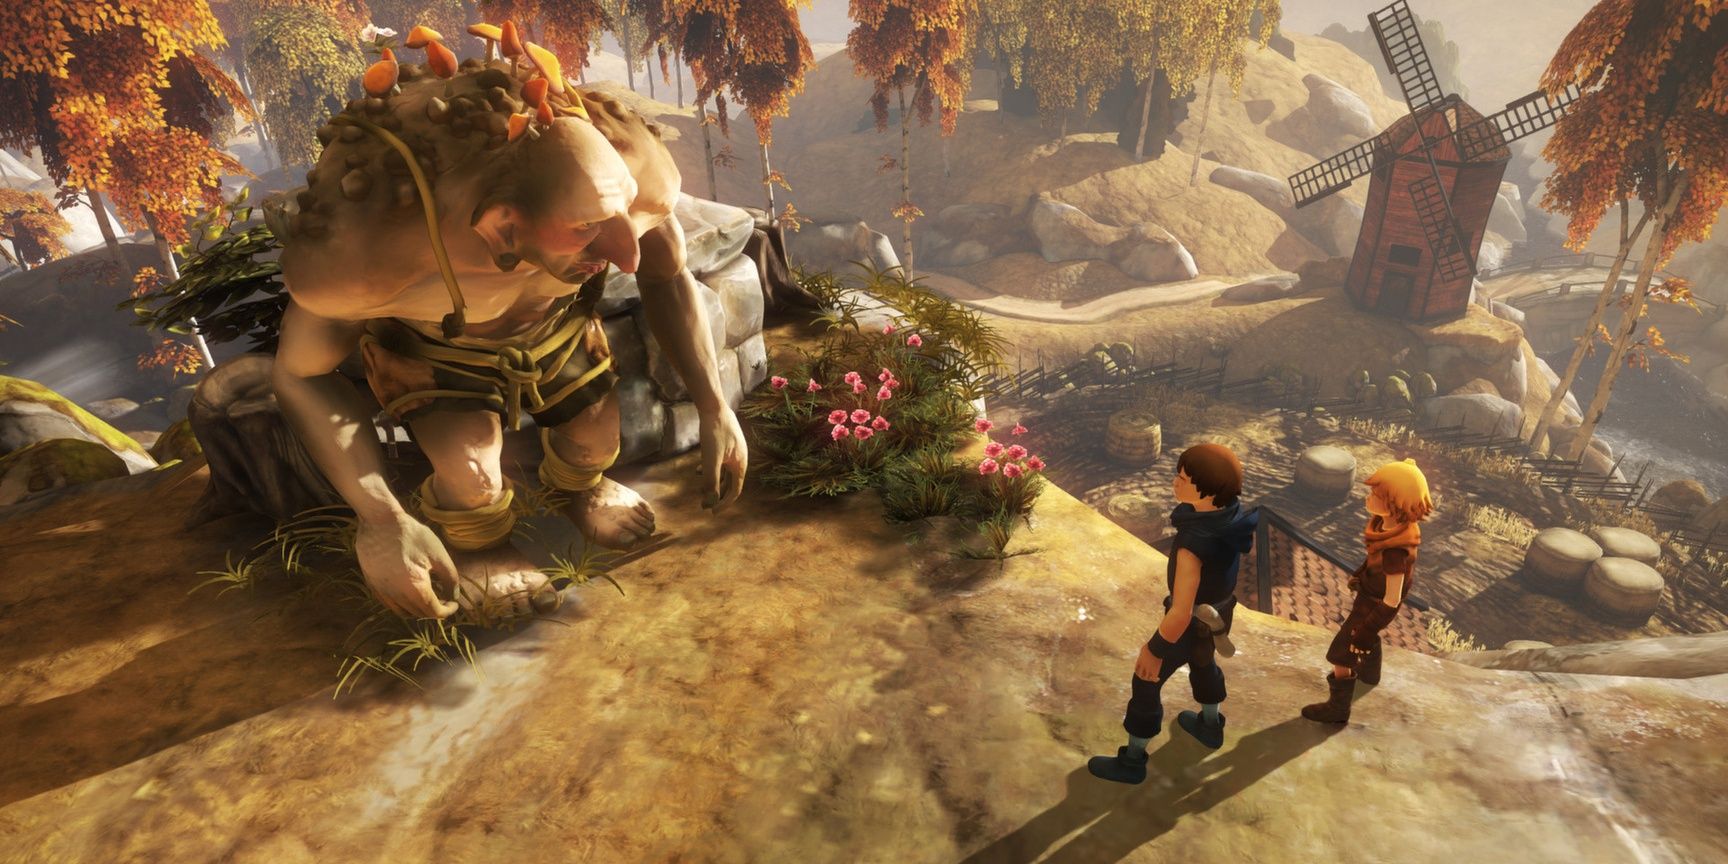 the brother's Naiee and Naia in Brothers: A Tale of Two Sons facing a giant troll-like creature